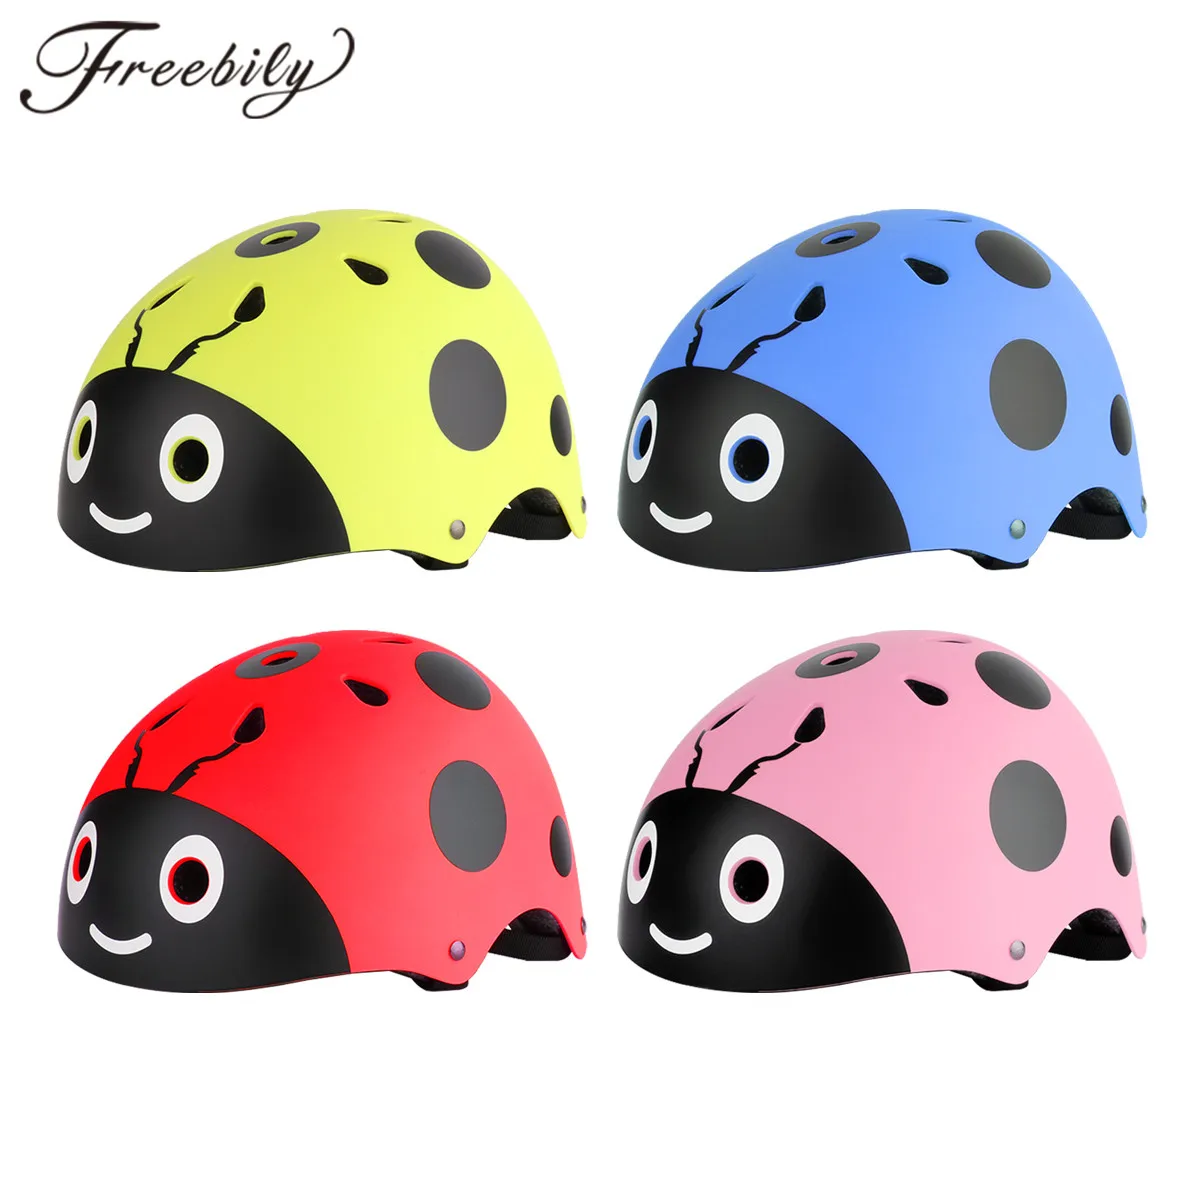 ADJUSTABLE KIDS TODDLER SAFETY HELMET FOR BALANCE BIKES AND SCOOTERS WHITE 